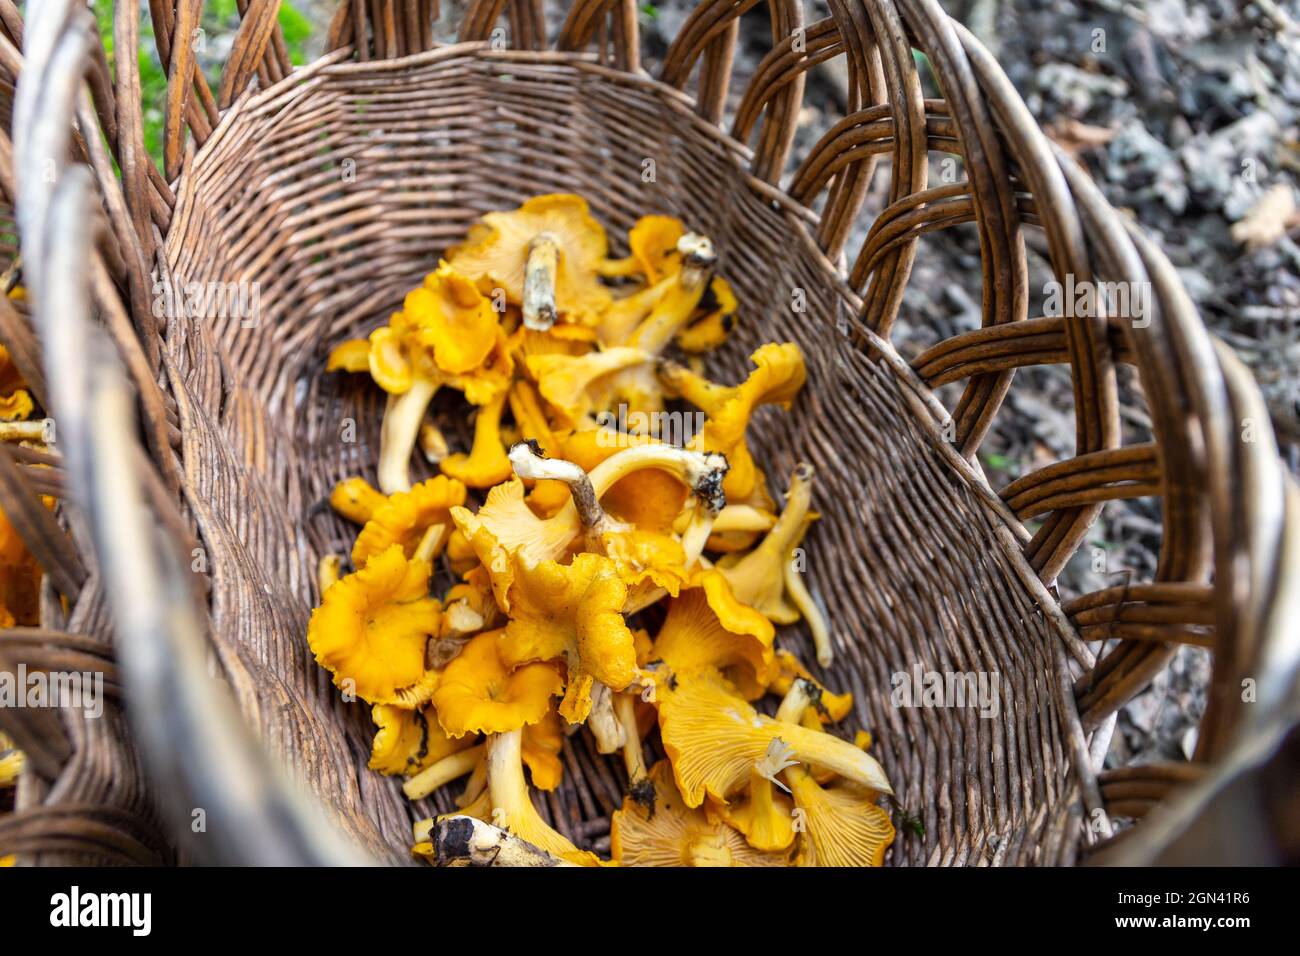 Wicker basket full of fresh raw Chanterelles (Cantharellus) mushrooms gathered during mushroom hunting in autumn  in Poland. Stock Photo